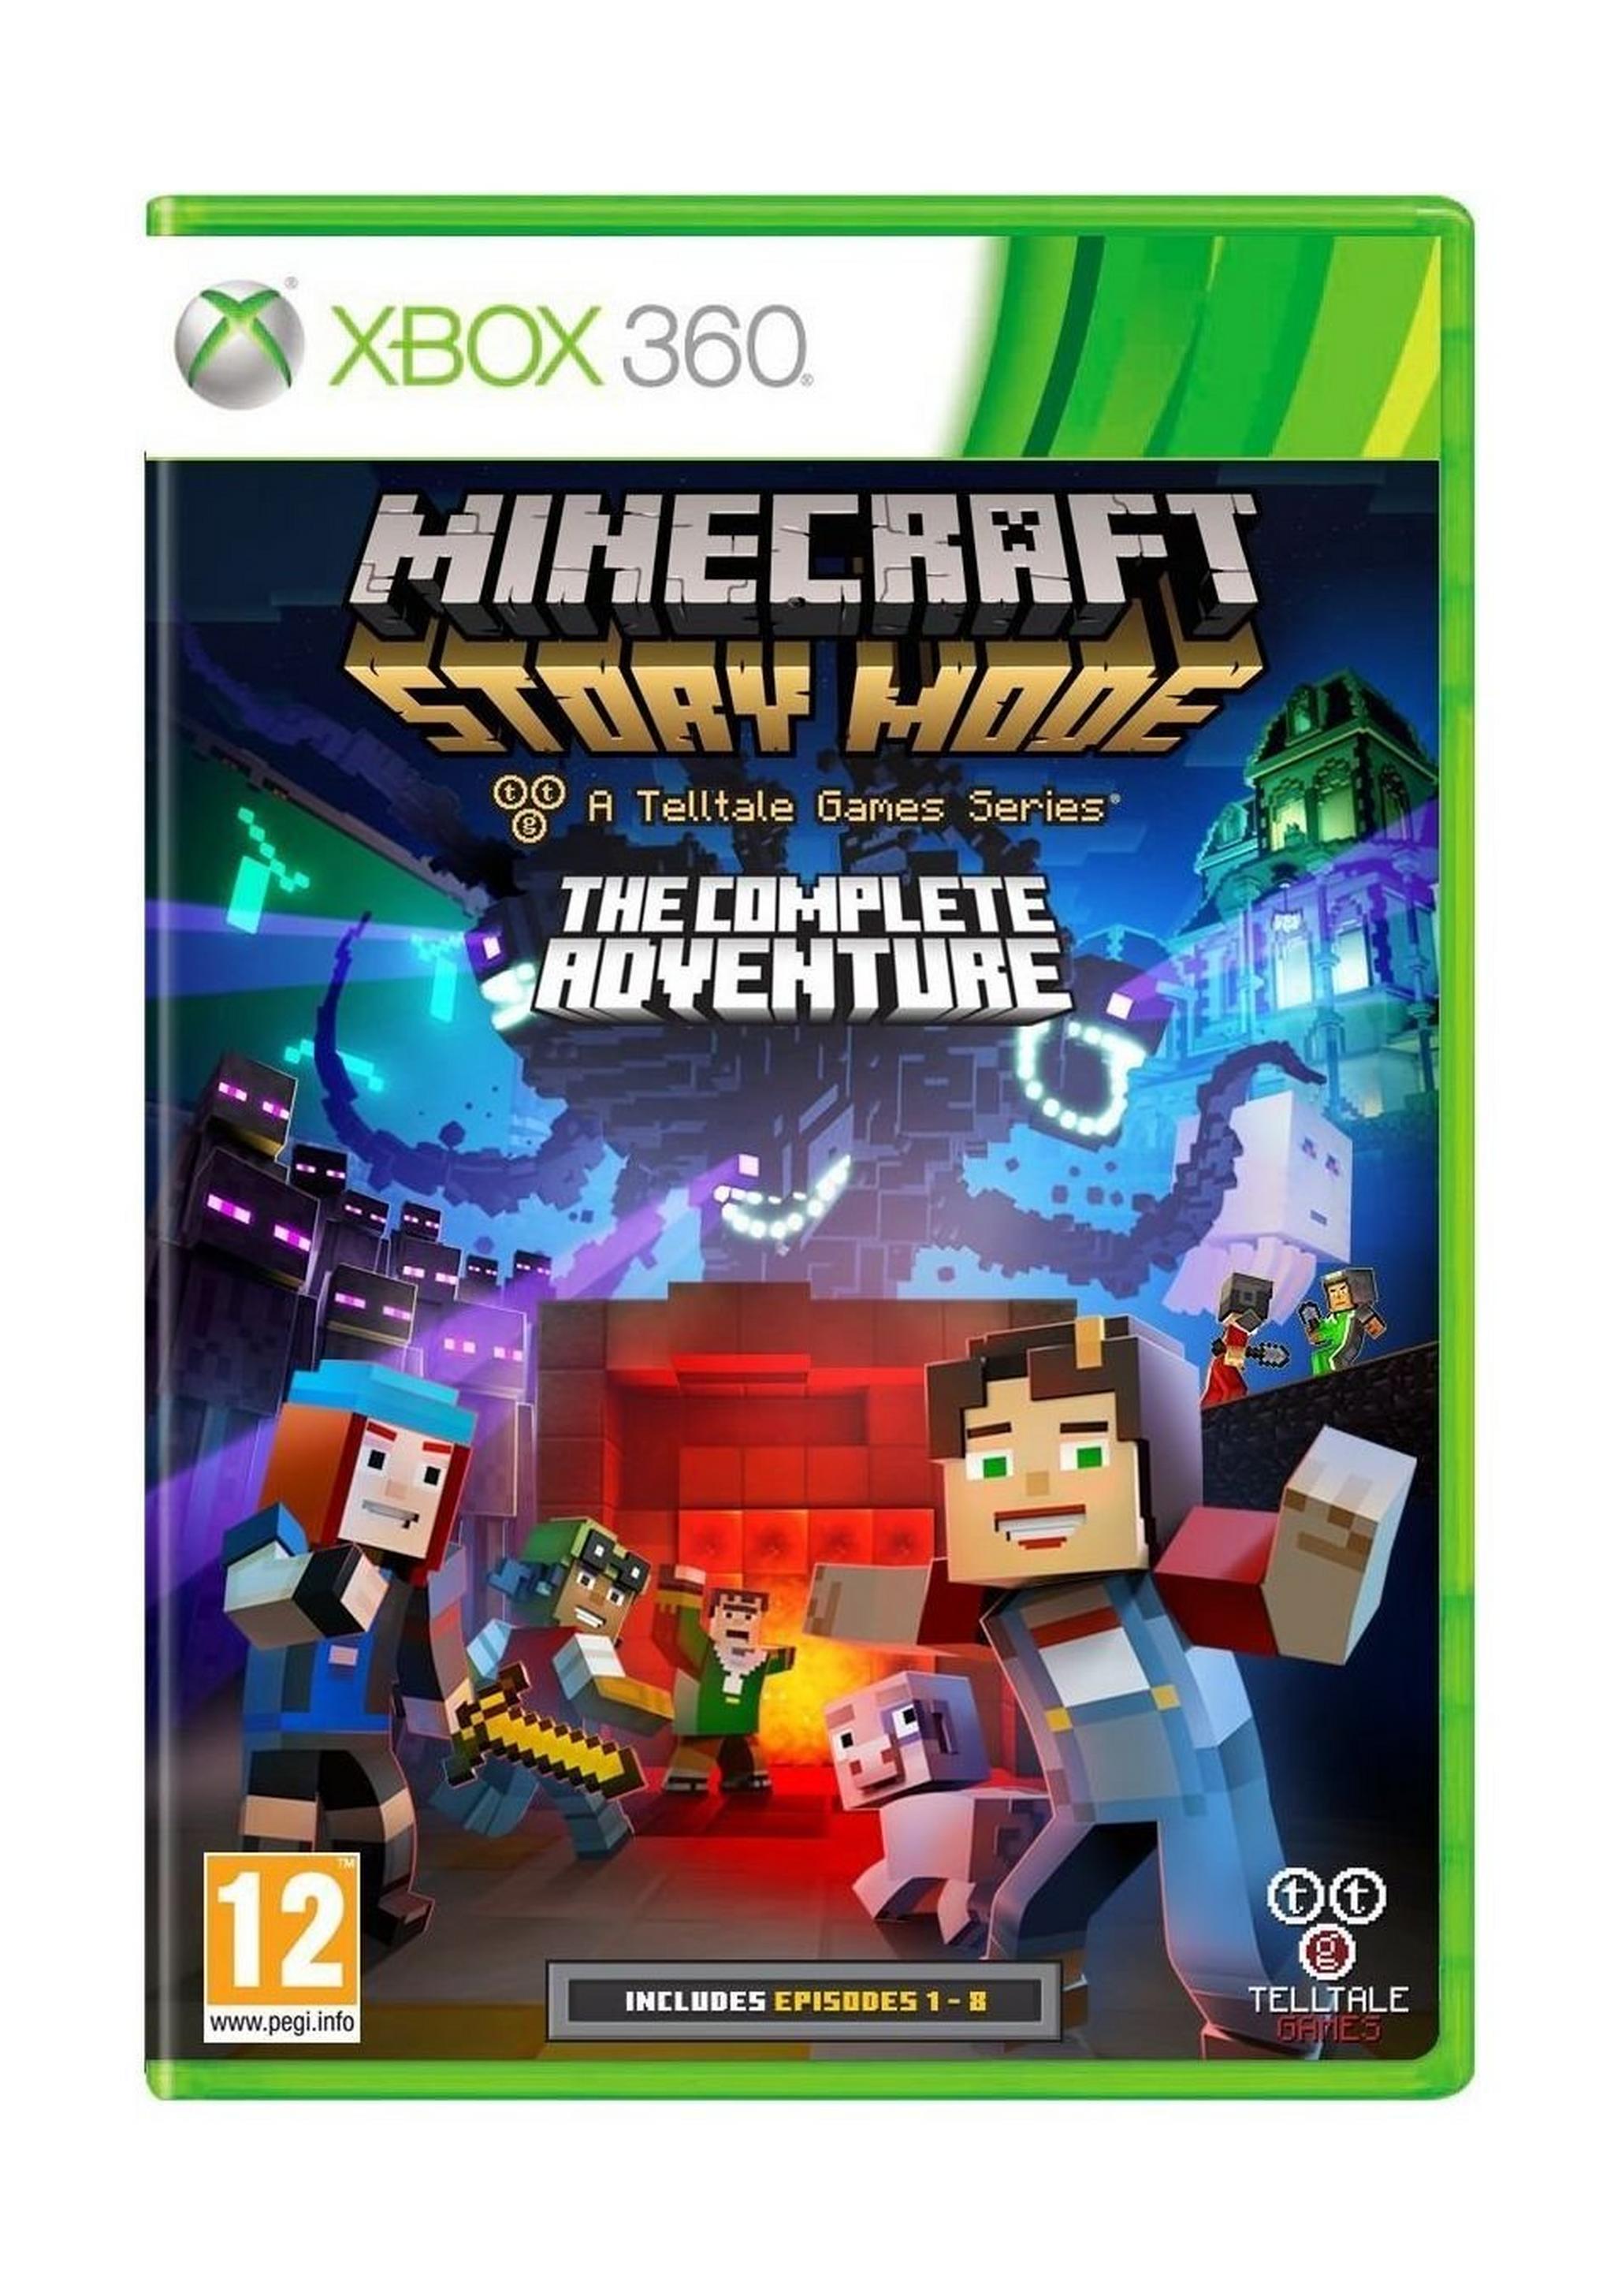 Minecraft Story Mode The Complete Adventure – Xbox 360 Game